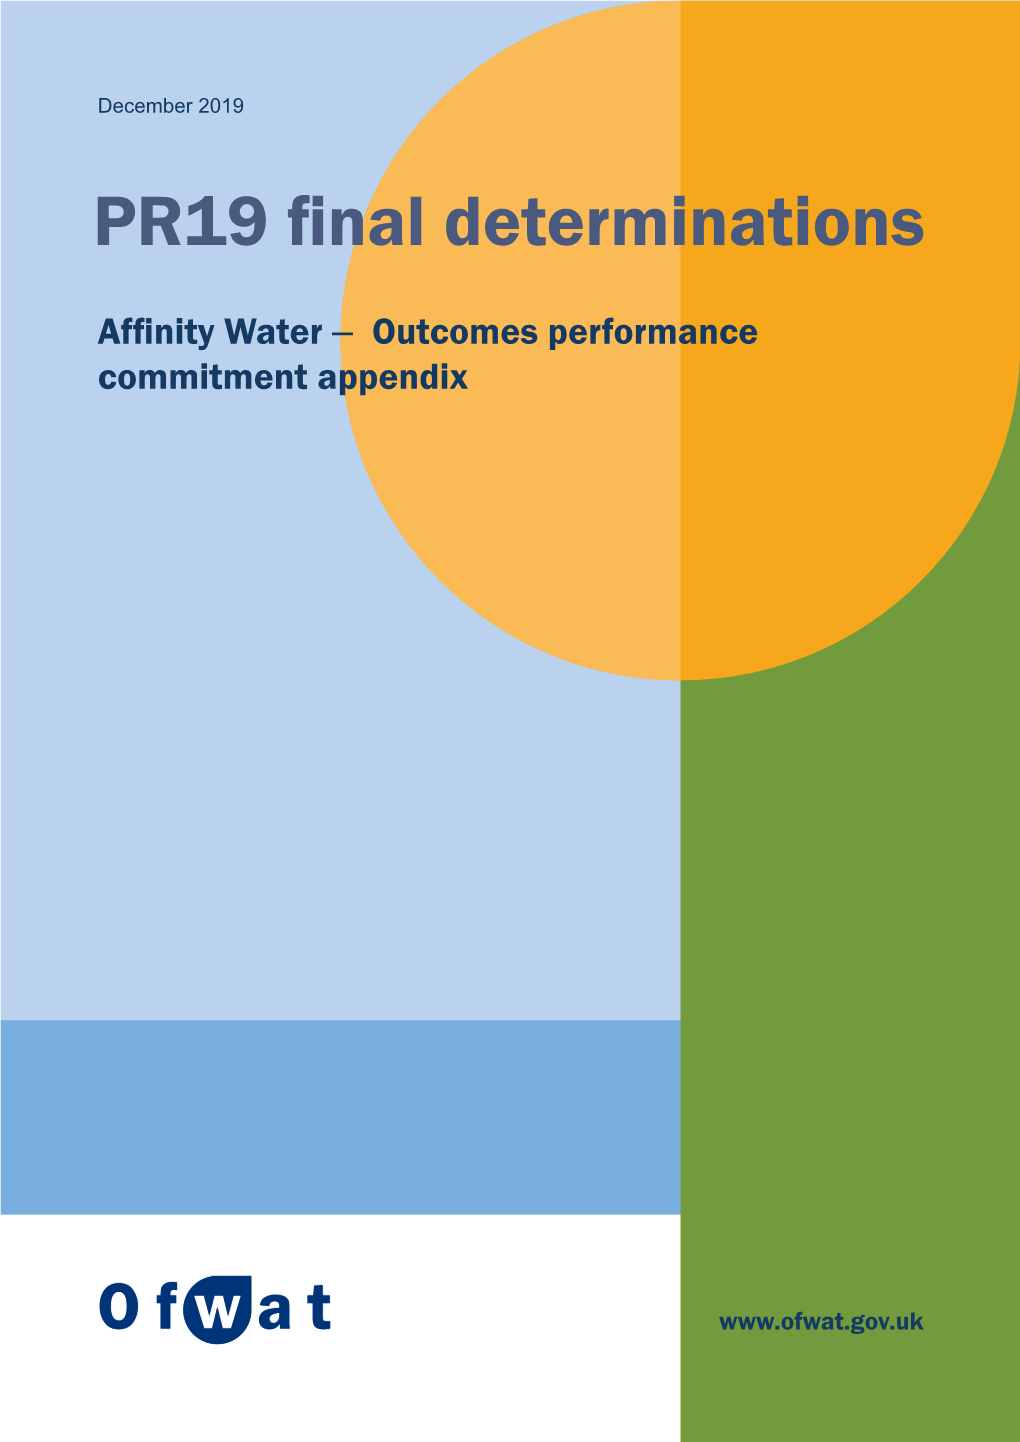 PR19 Final Determinations: Affinity Water – Outcomes Performance Commitment Appendix